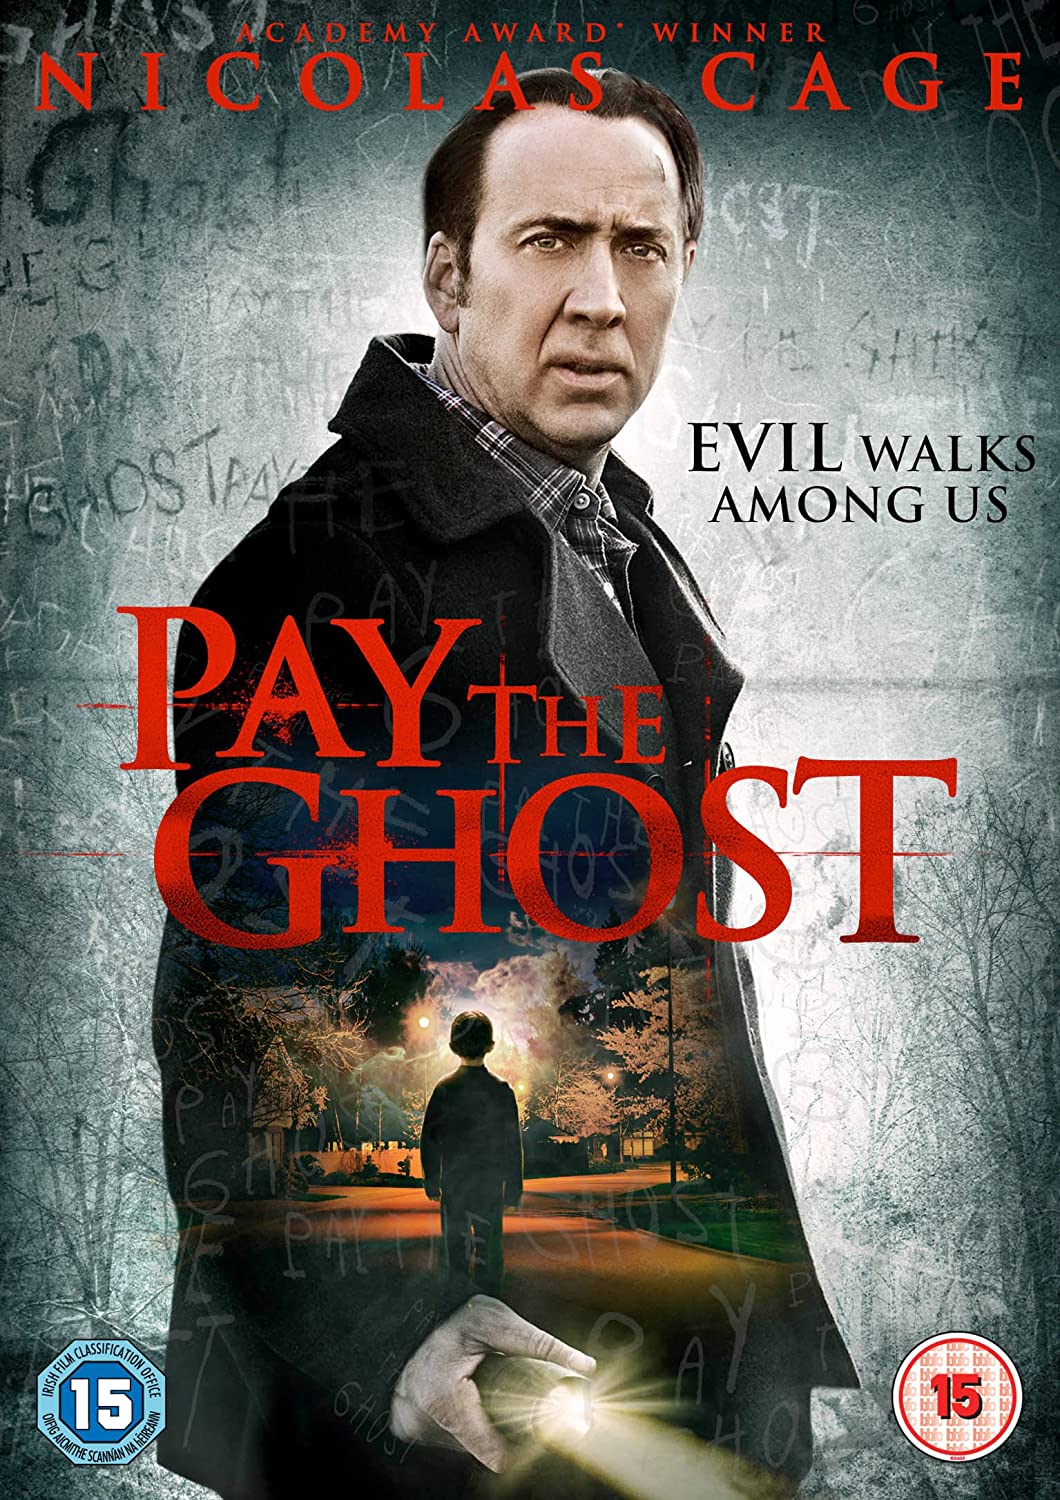 Pay The Ghost [Horror] [DVD]